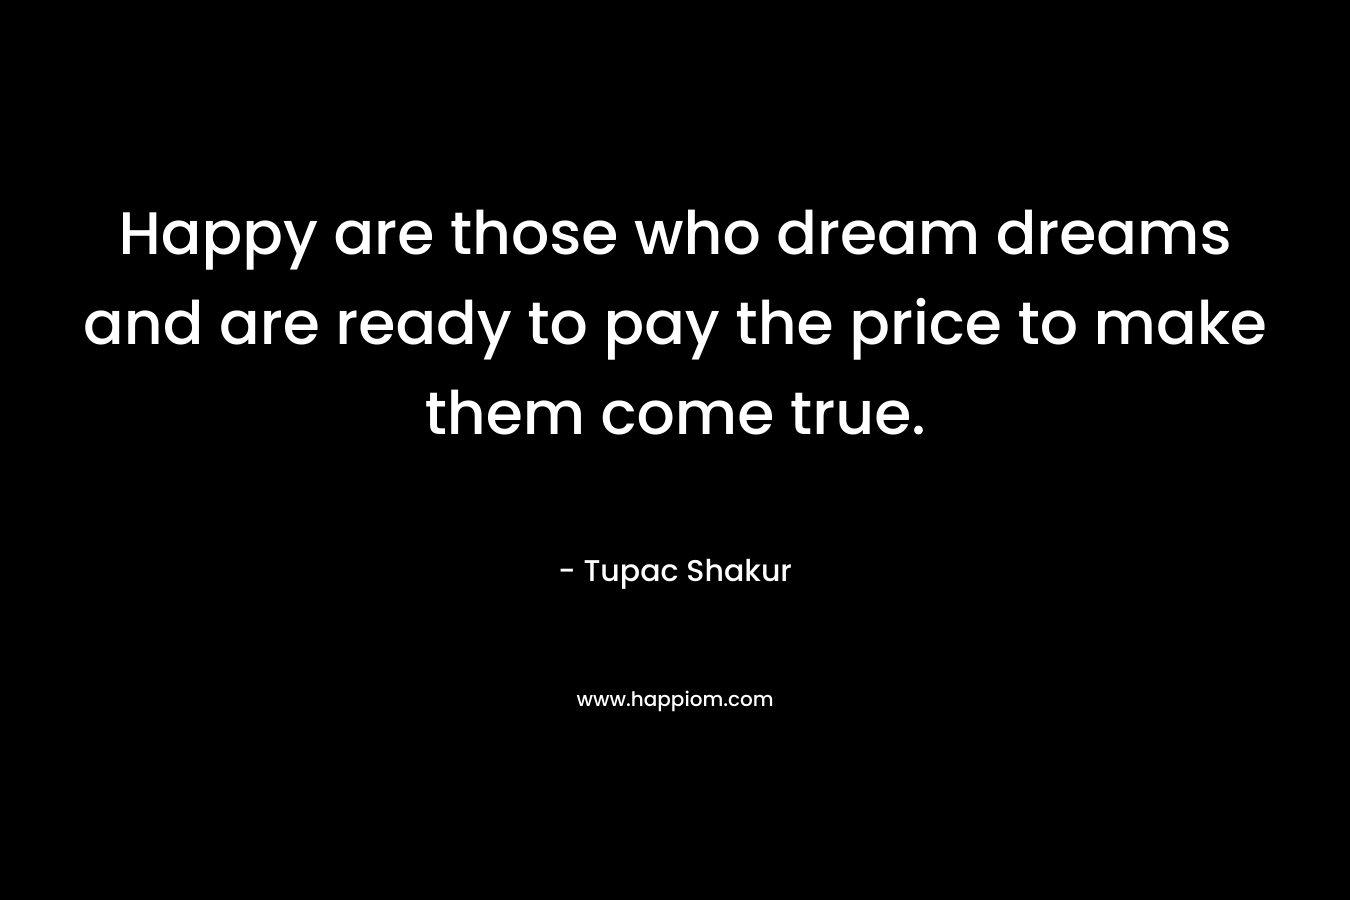 Happy are those who dream dreams and are ready to pay the price to make them come true. – Tupac Shakur